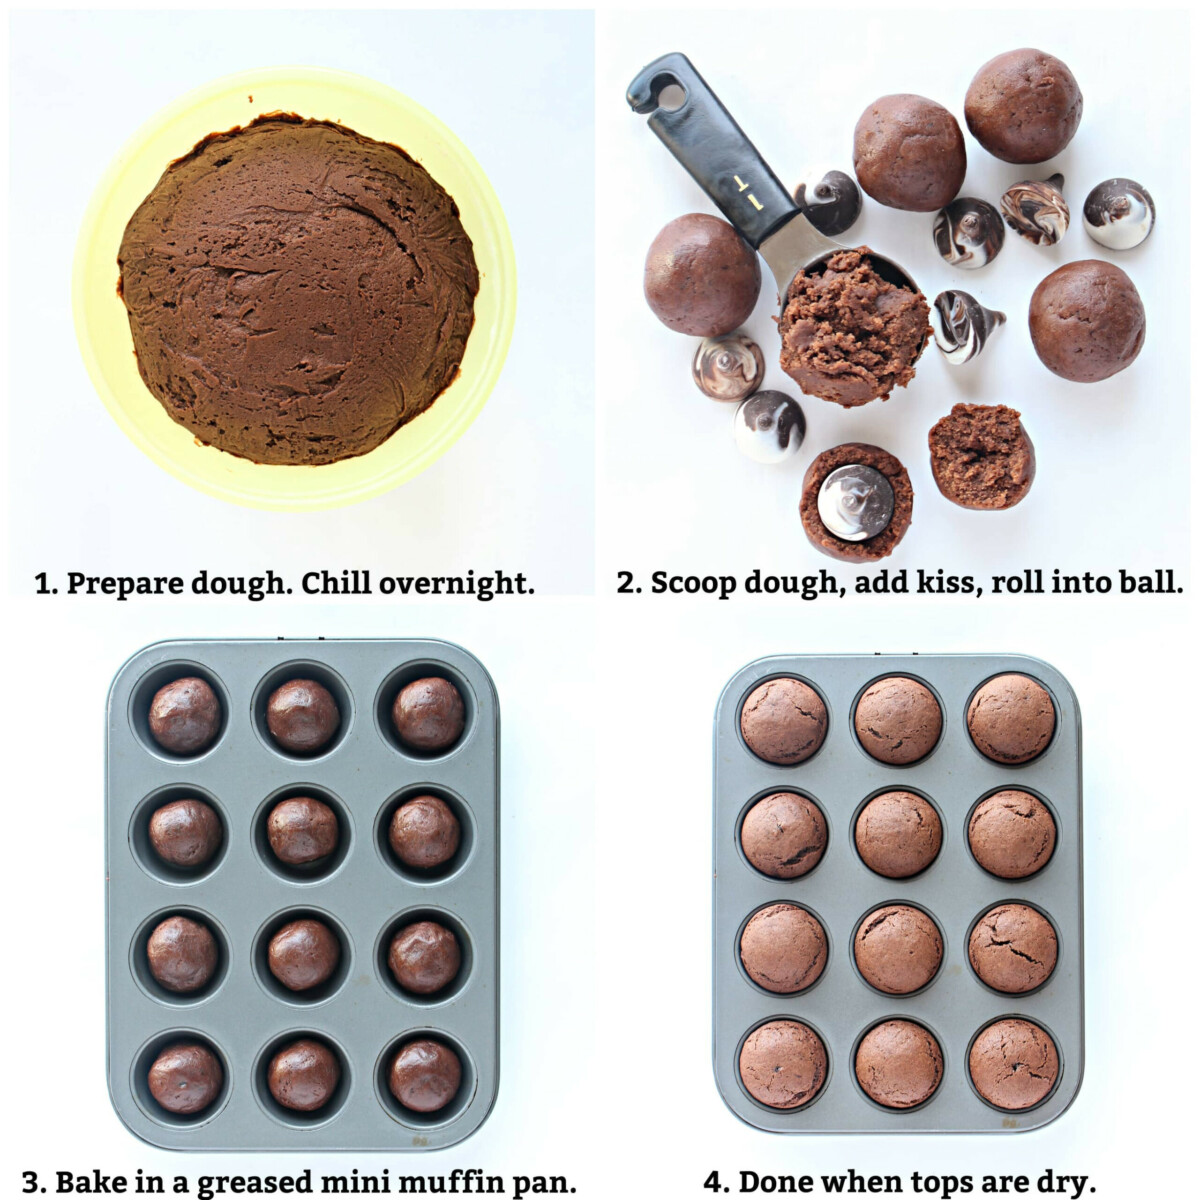 Process collage shows prepare dough, scoop, add kiss, roll into balls, bake in mini muffin pans.